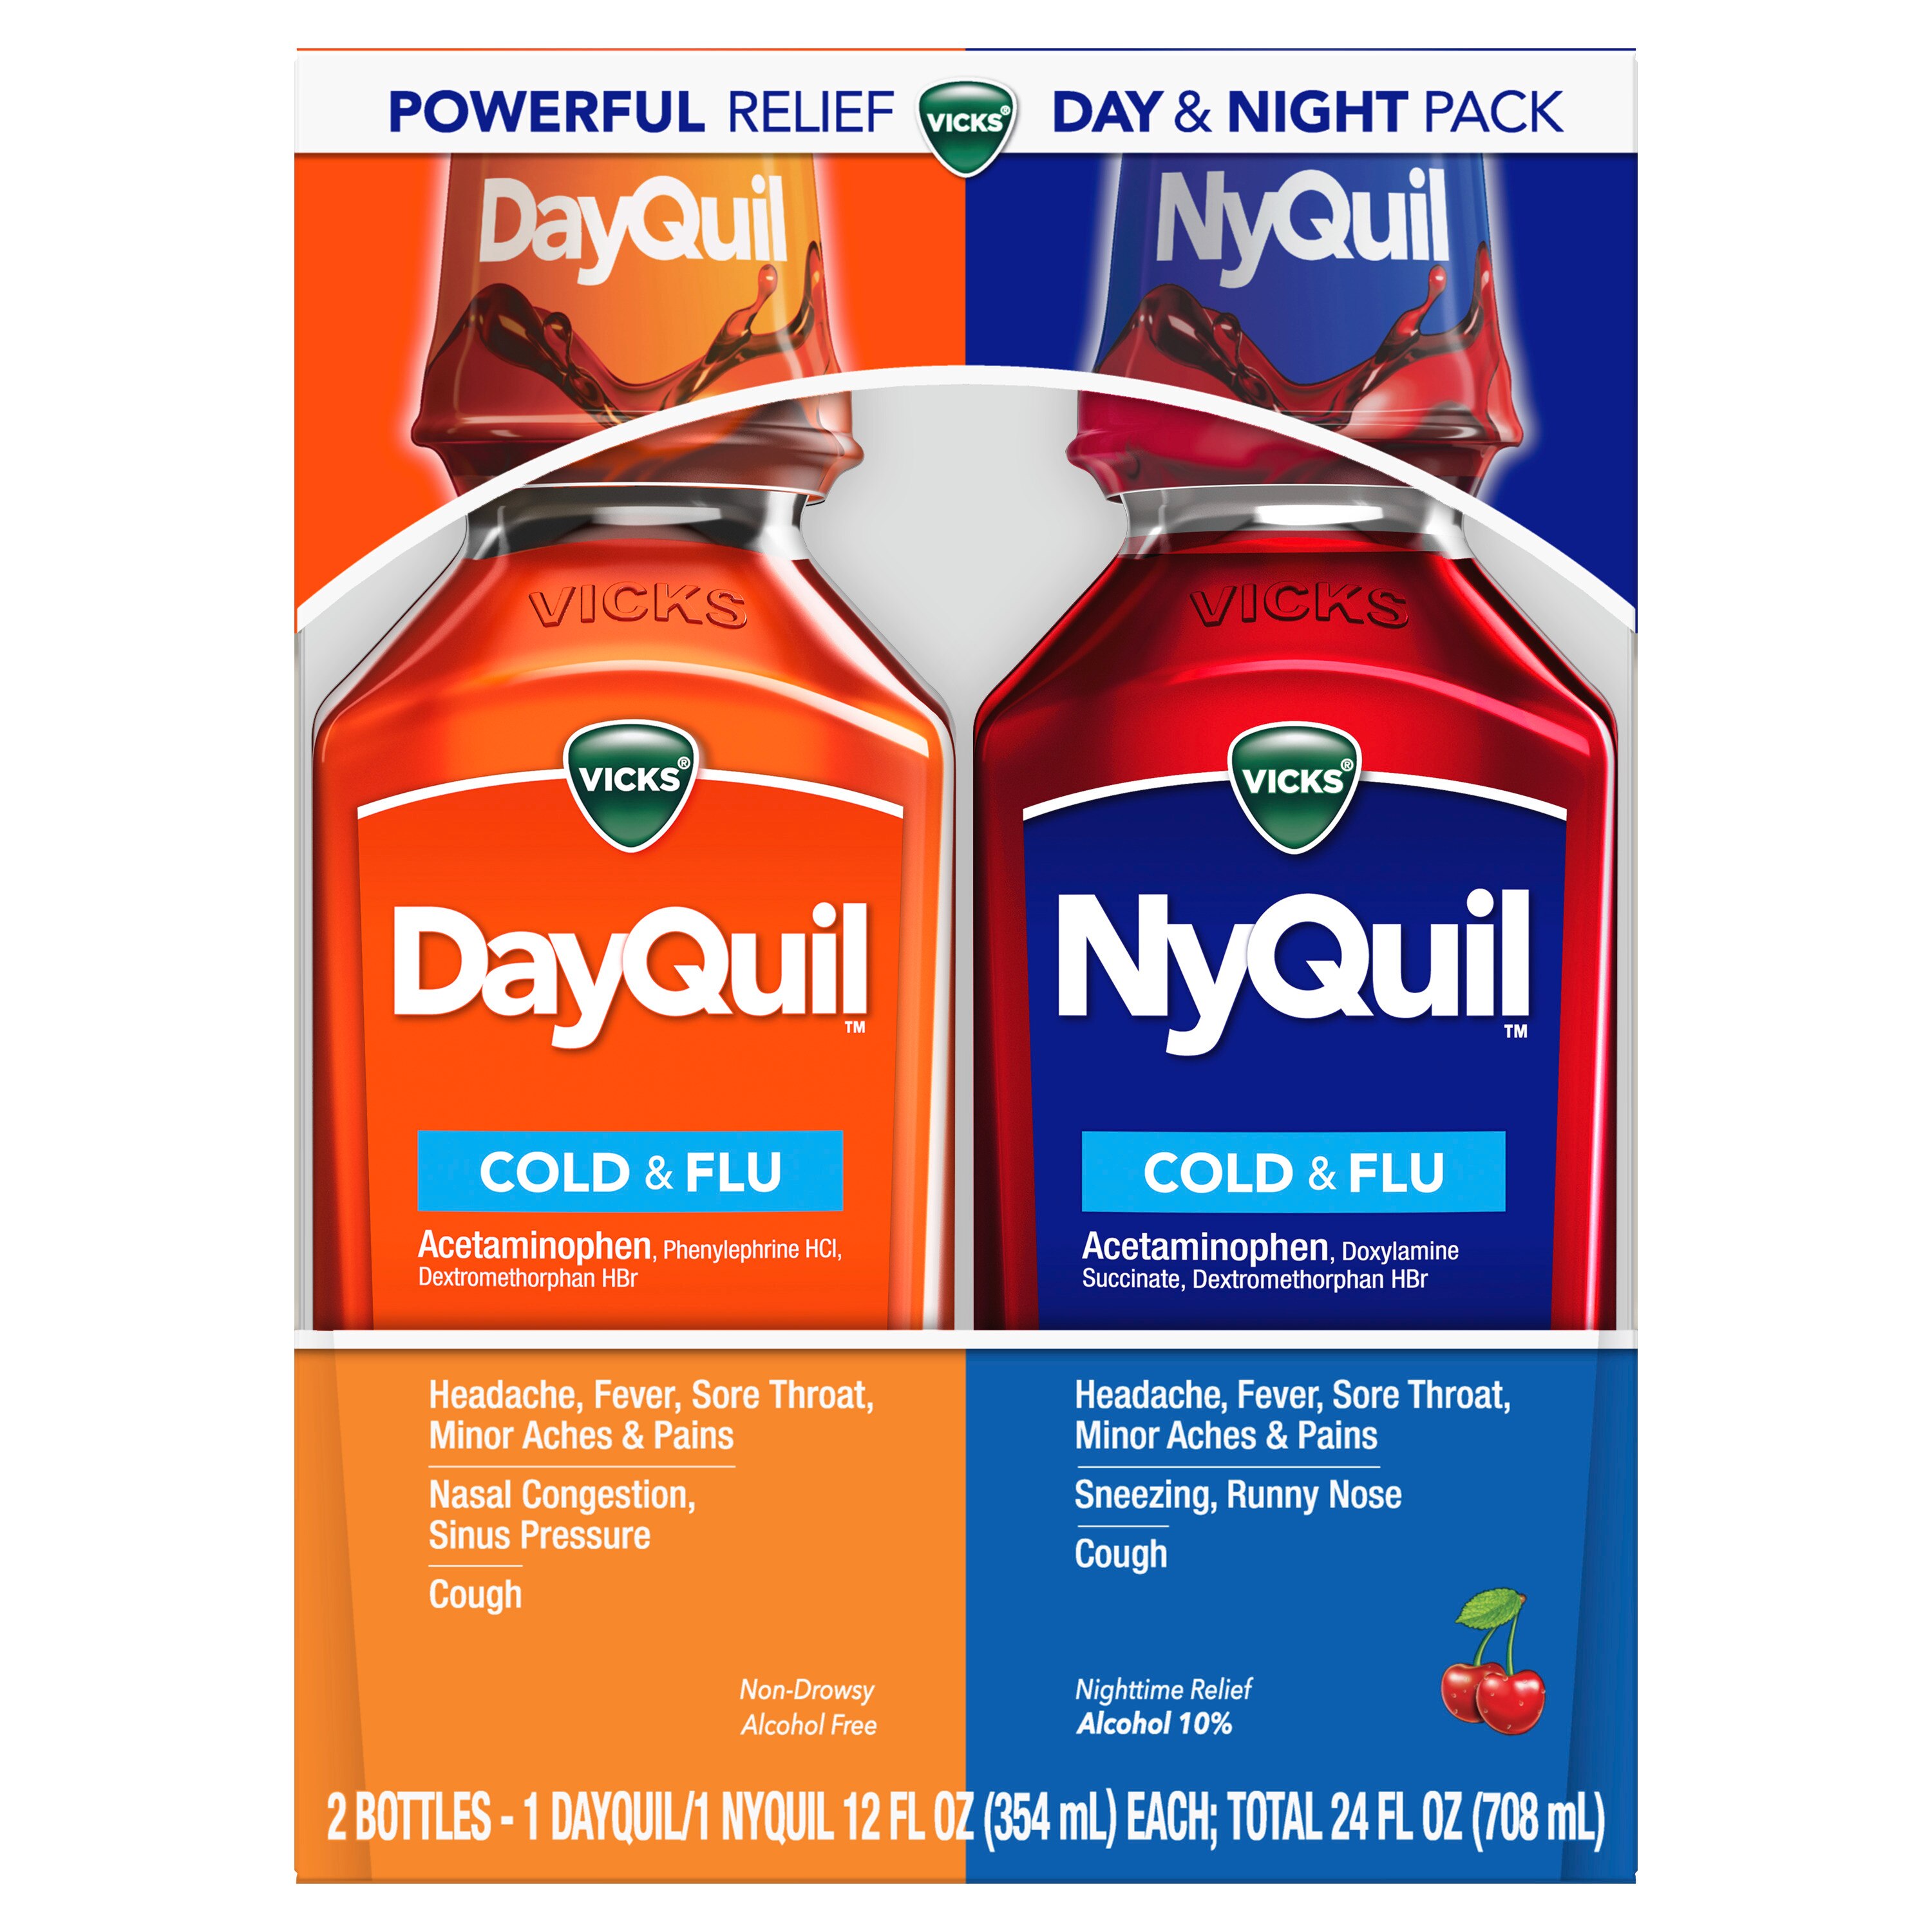 Vicks DayQuil, Non-Drowsy, Daytime Cold & Flu Medicine & NyQuil, Nighttime Multi-Symptom Relief, Cherry Flavor, Liquid Combo Pack 12 OZ Each